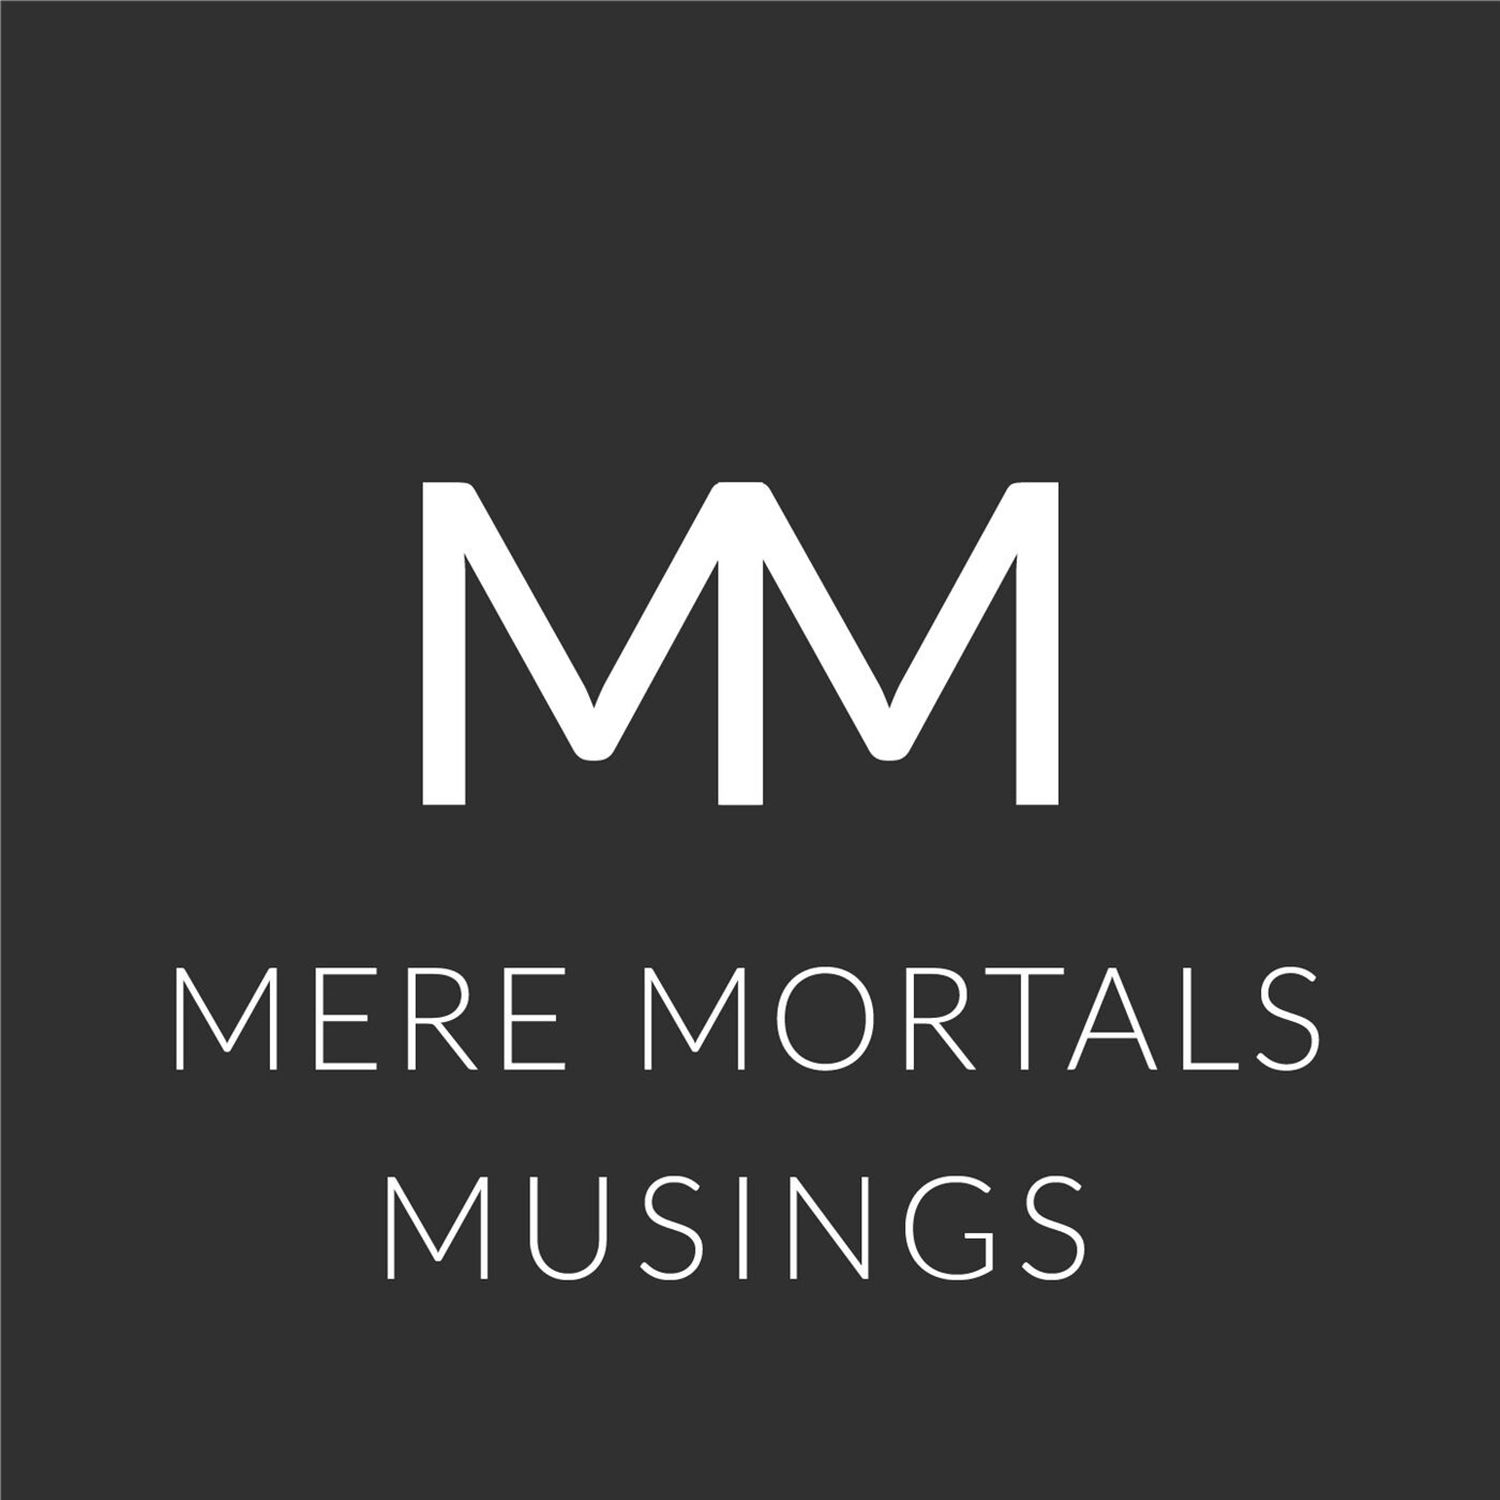 The Most Useless Meeting Ever (Mere Mortals Episode #90 - Musings)